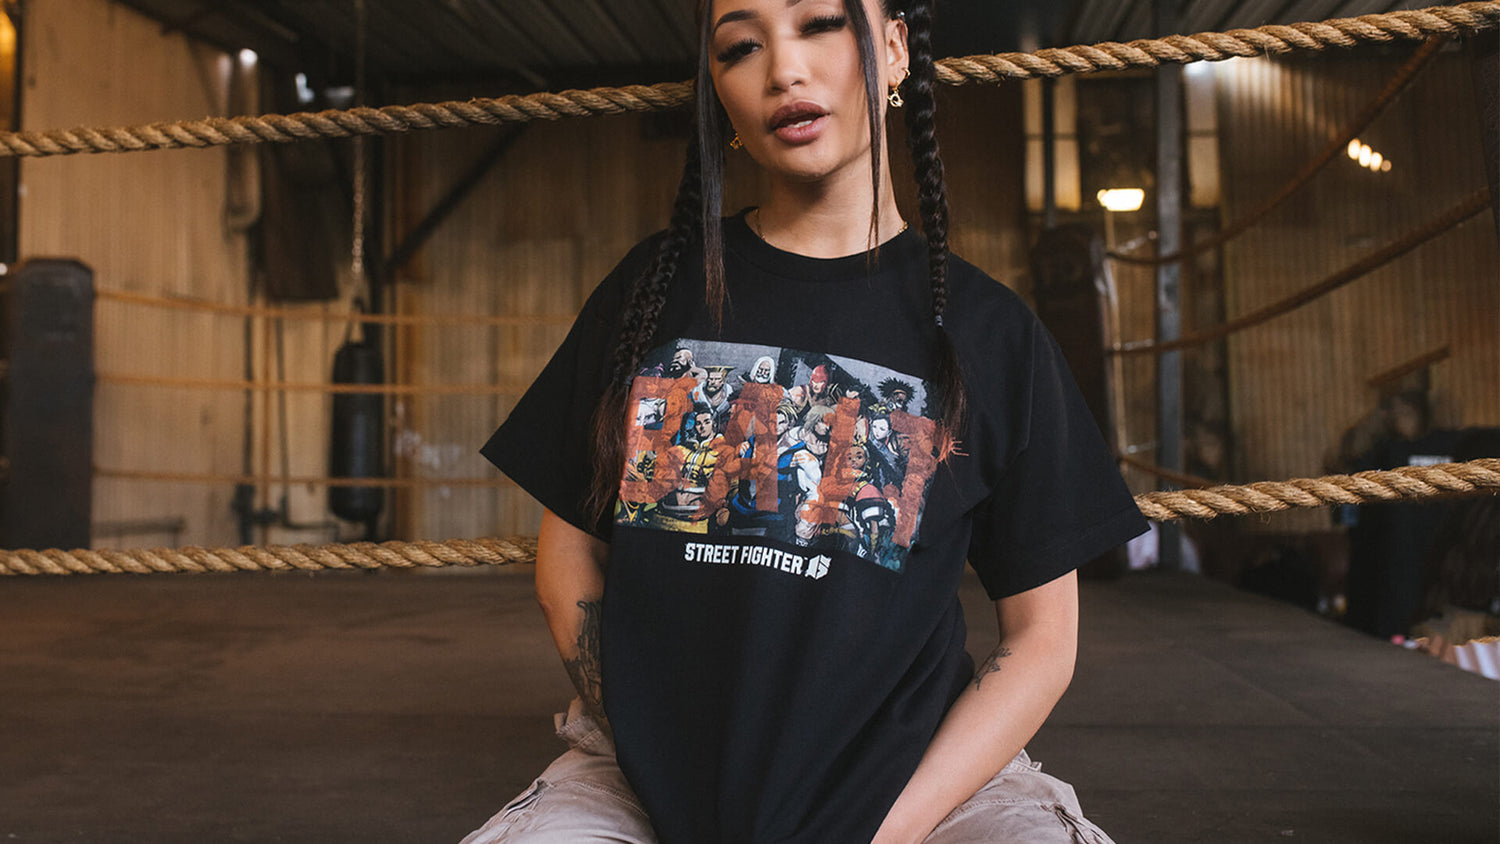 BAIT STREET FIGHTER6 Capsule Collection